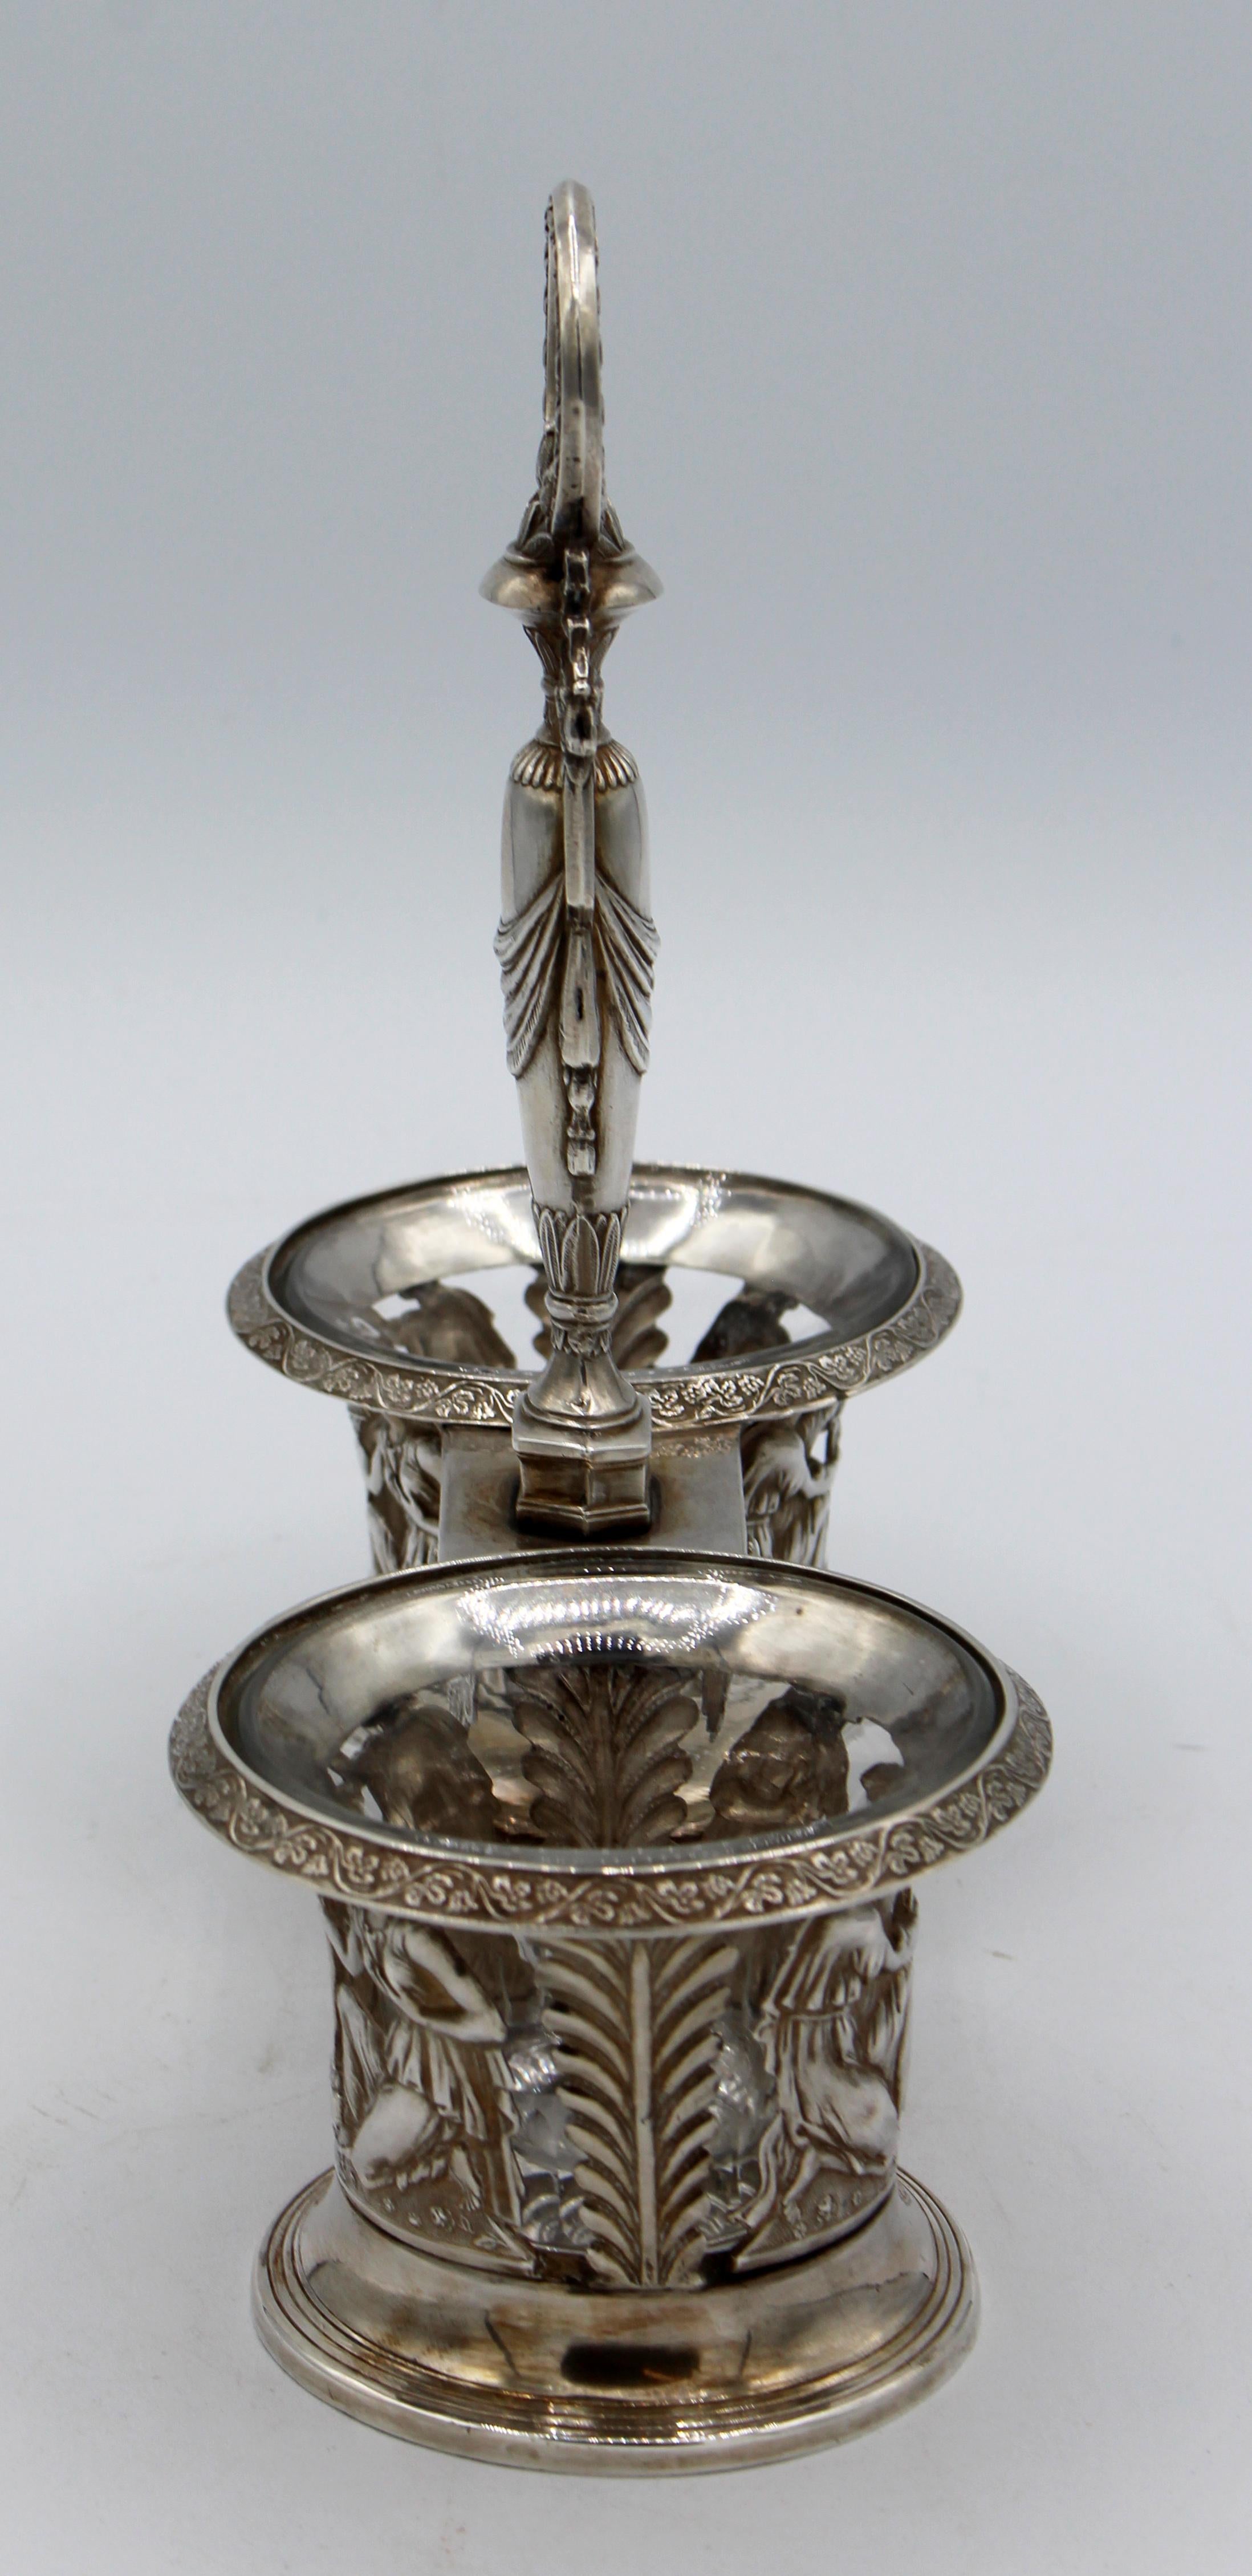 An elegant c.1870-90 neo-classical condiment set with glass inserts. Continental, 800 or higher standard silver. Zeus & Hera with eternal flame hold baskets. Ram supporters on the urn. Each part hallmarked.
Measures: 7 3/8